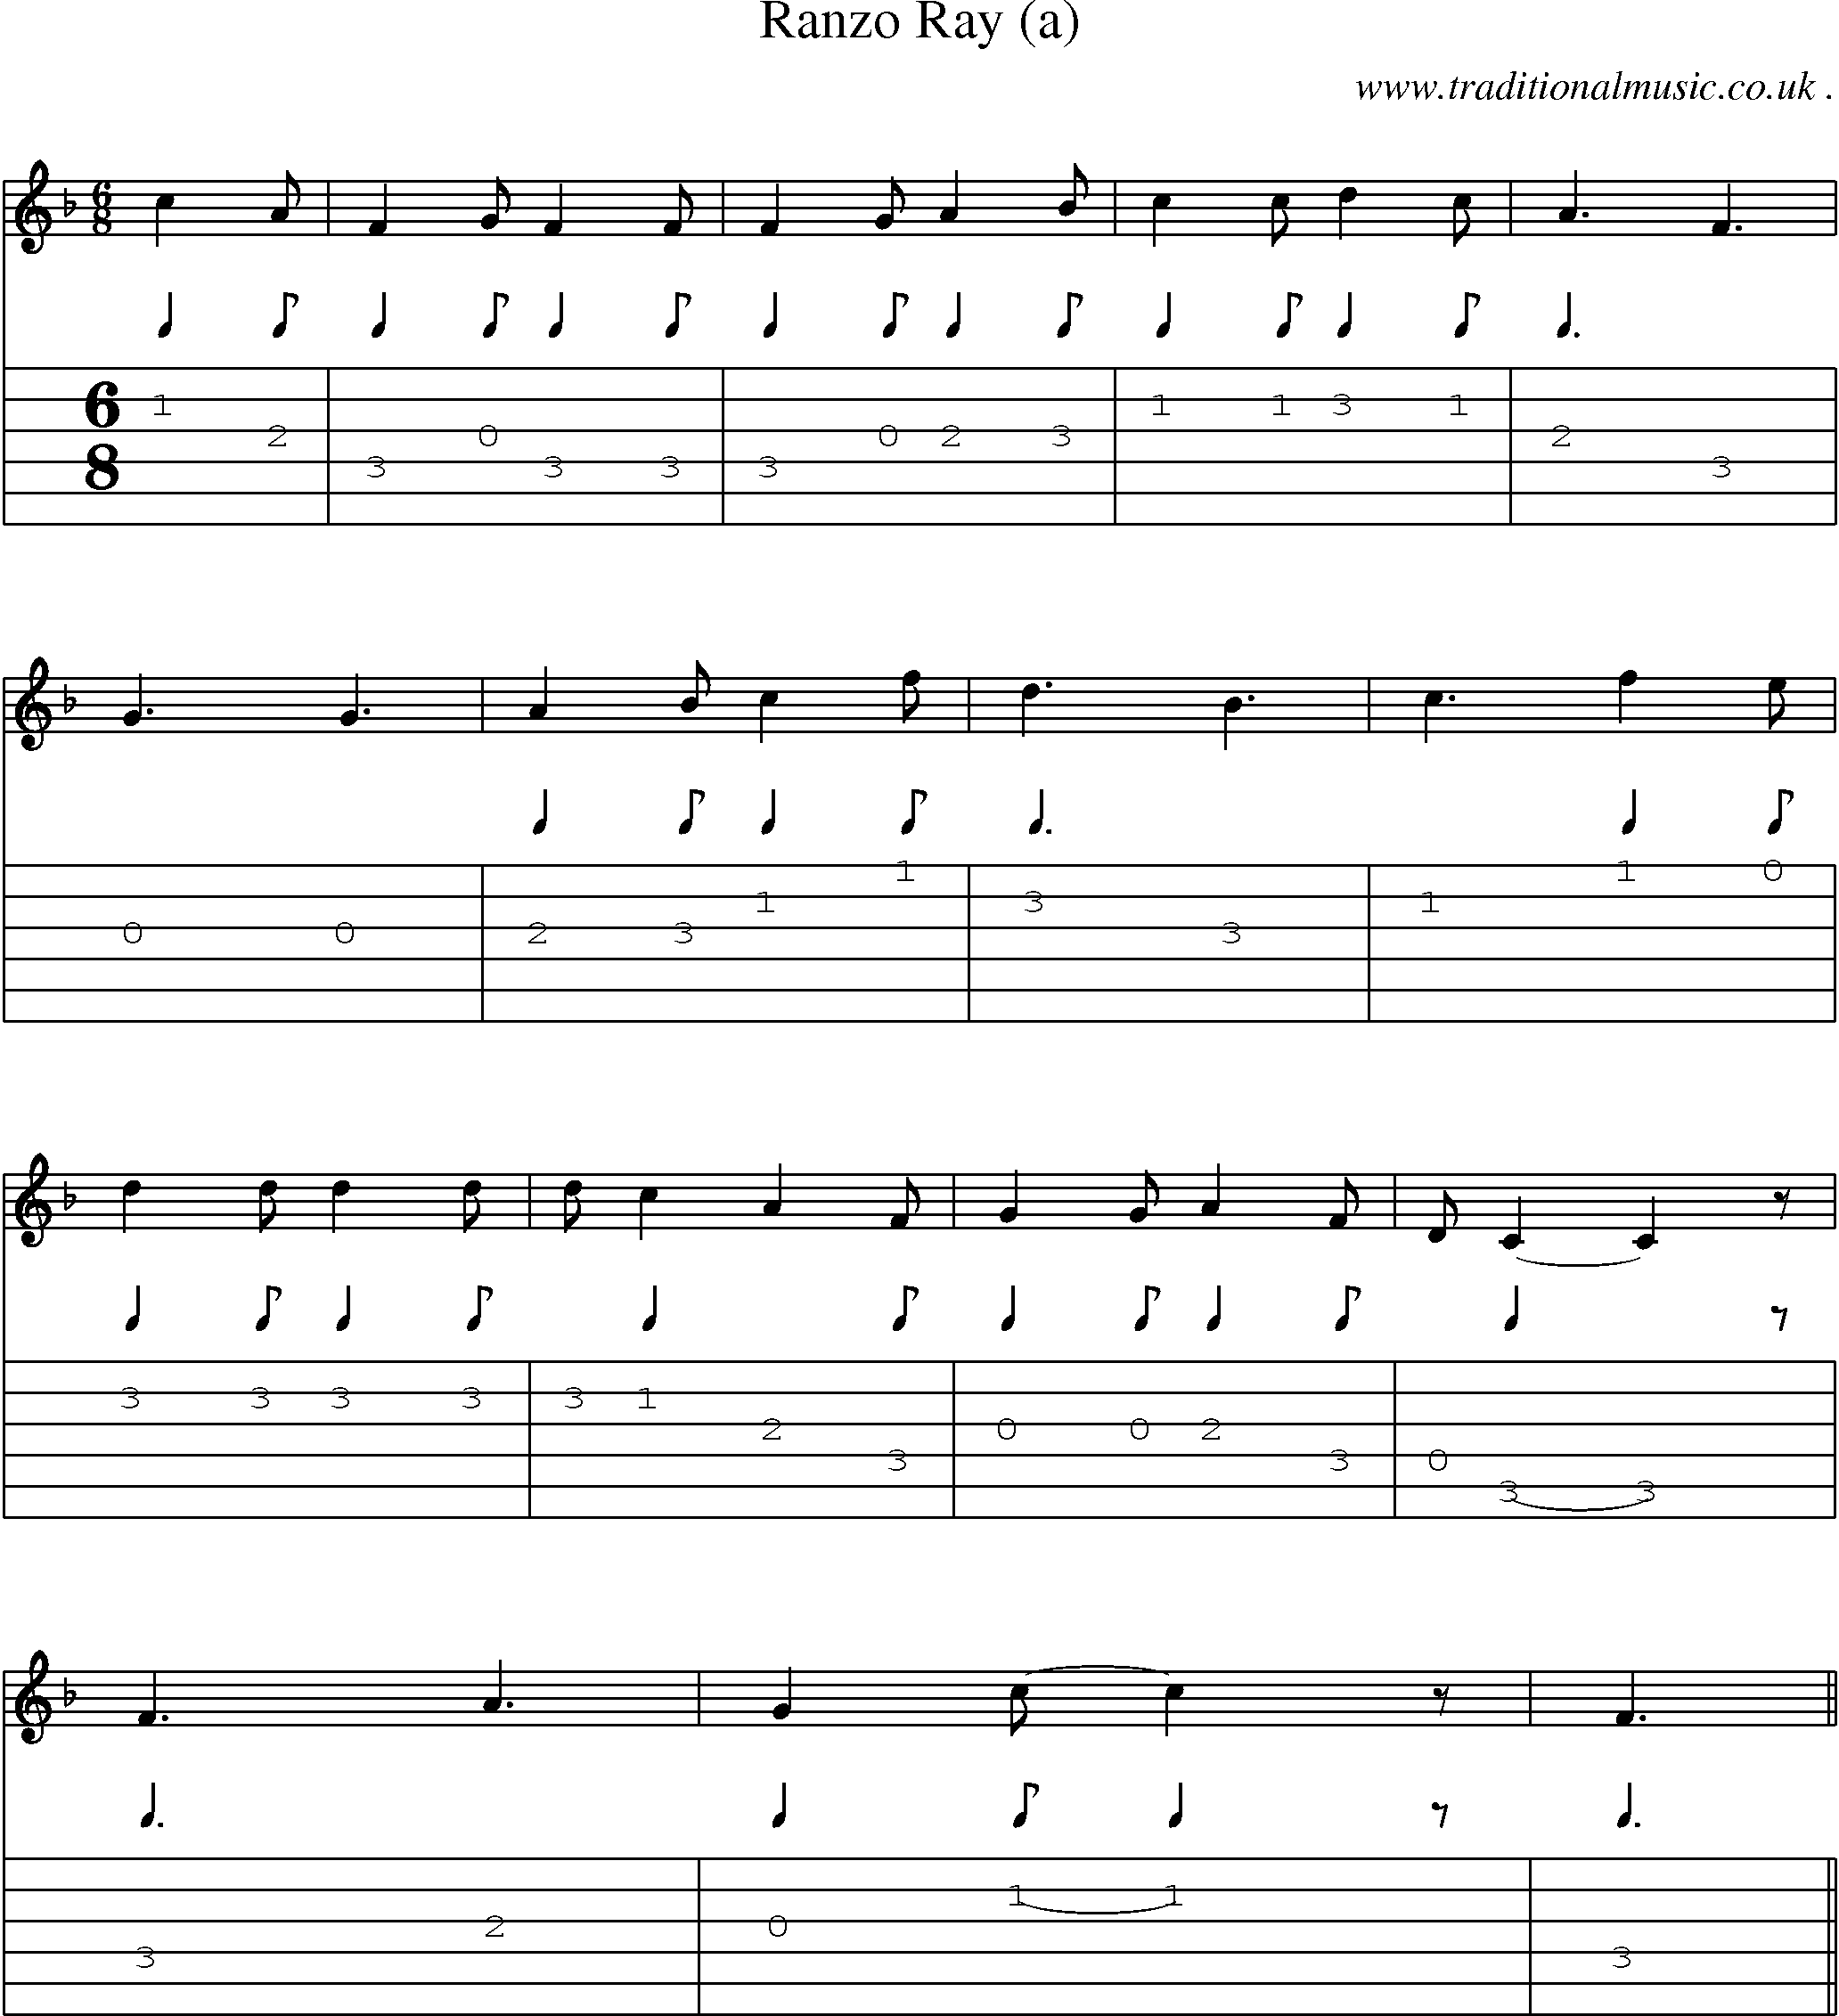 Sheet-Music and Guitar Tabs for Ranzo Ray (a)